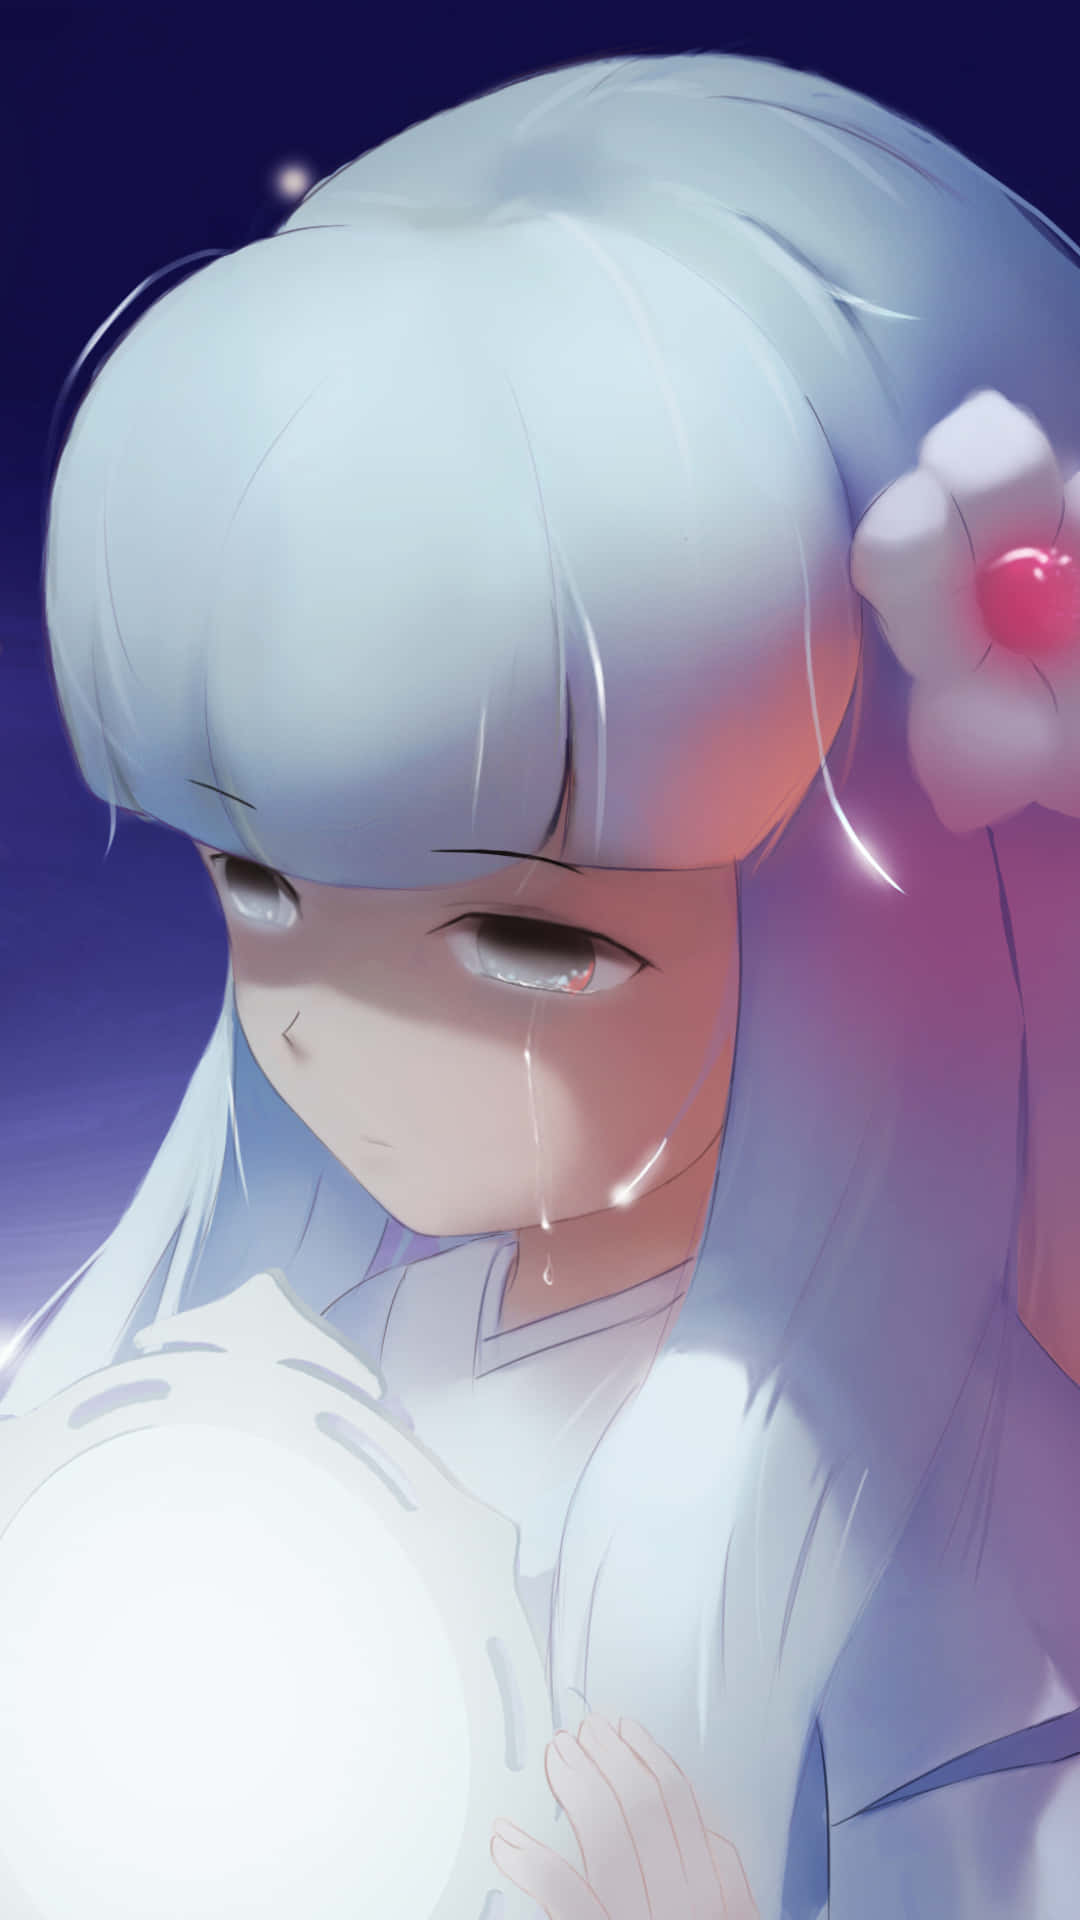 Inuyasha Kanna - The Enigmatic Mystique Wallpaper